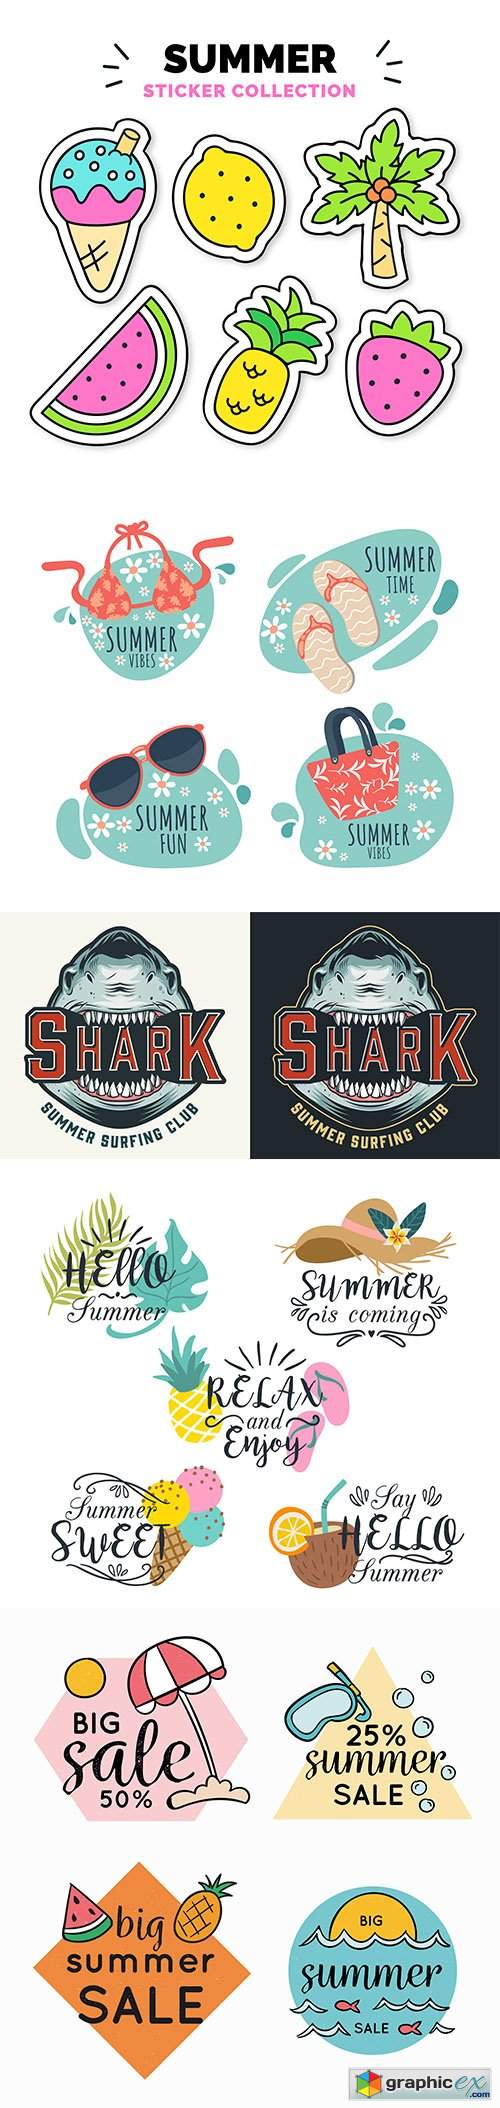  Colorful hand-drawn summer badge collection and surfing club logo 